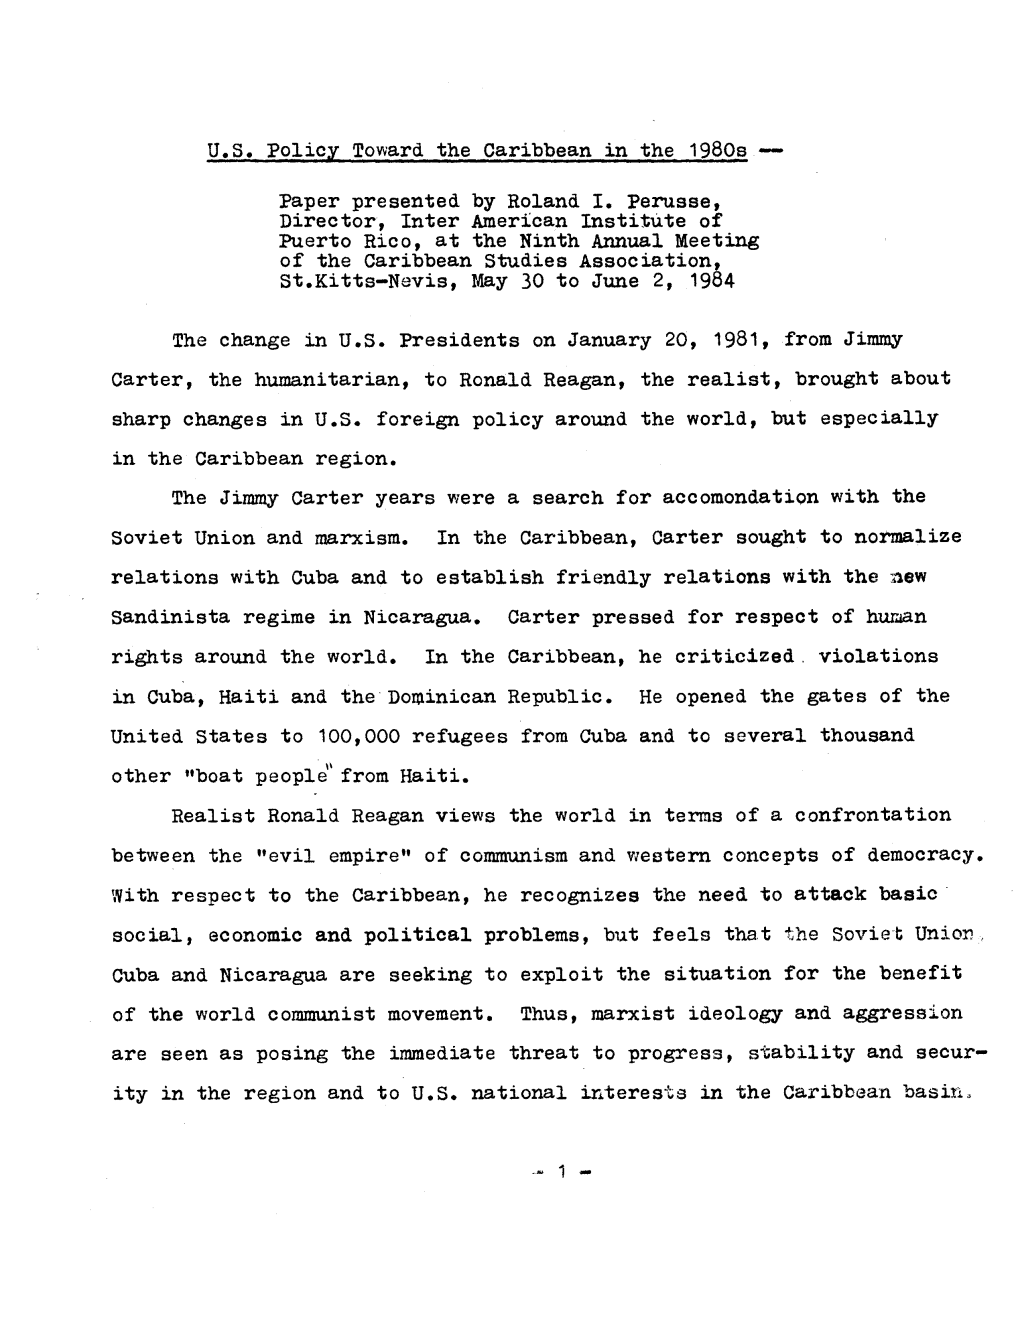 U.S. Policy Toward the Caribbean in the 1980S